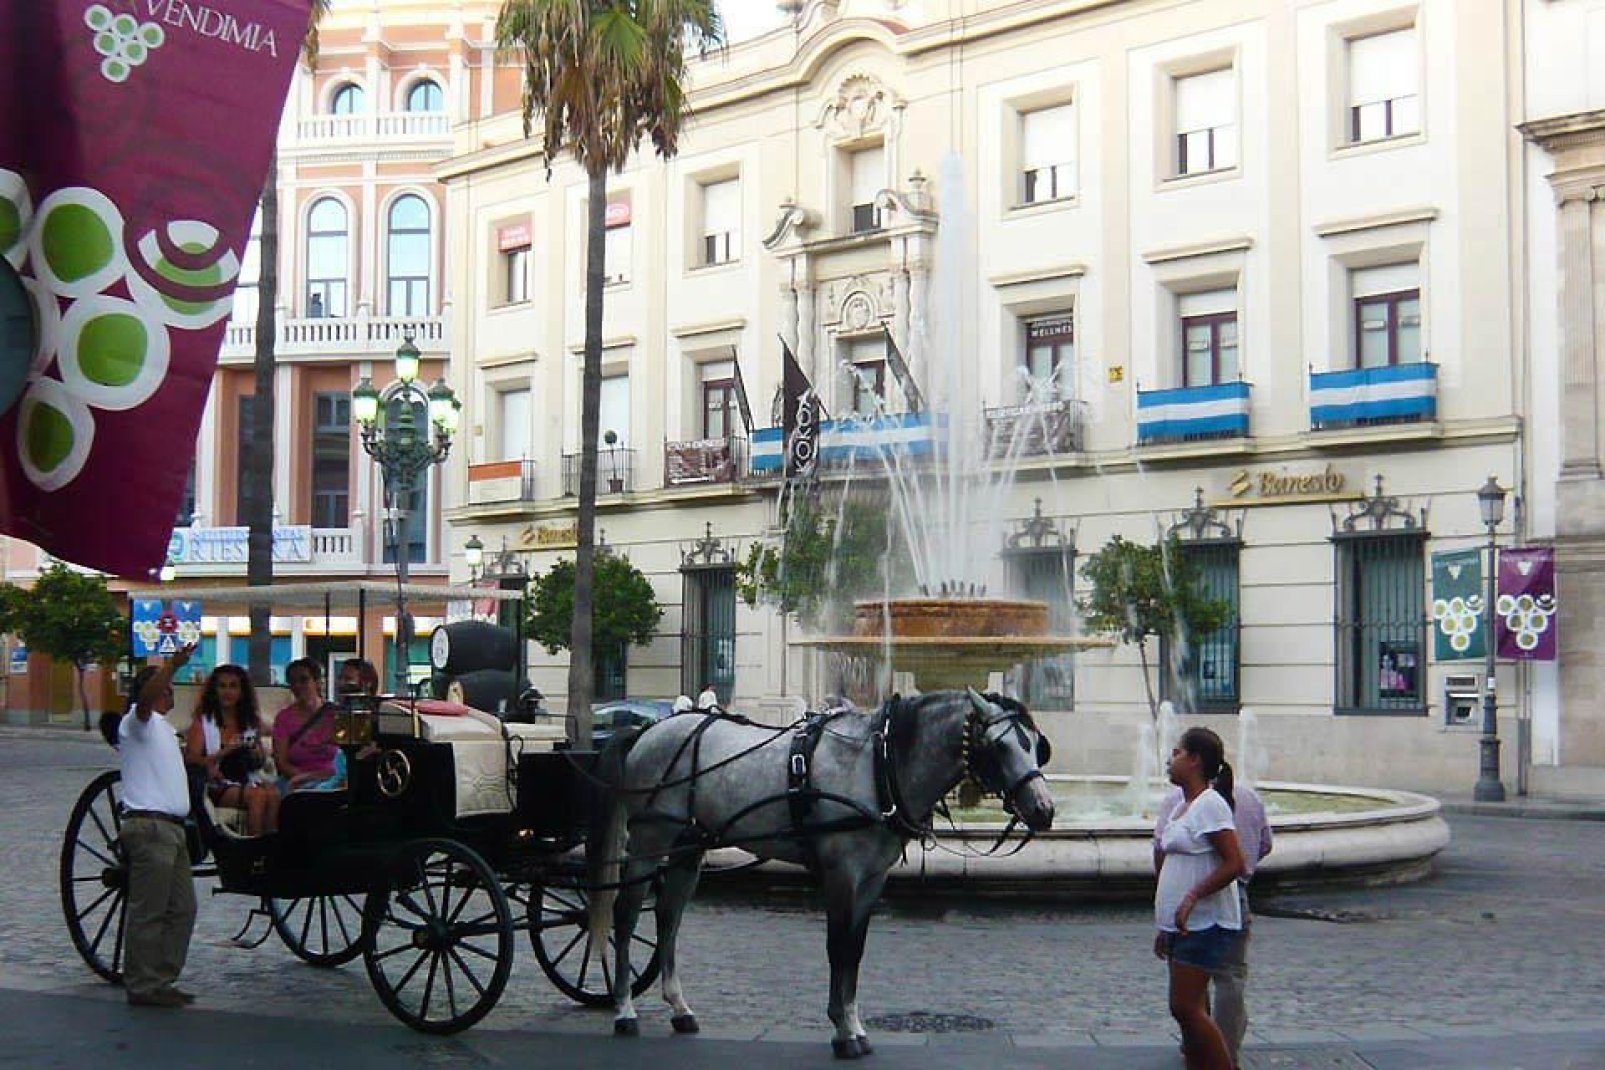 As well as being famous for its wines, its brandies and its vinegar, Jerez de la Frontera is also home to the Andalusian Royal School of Equestrian Art.